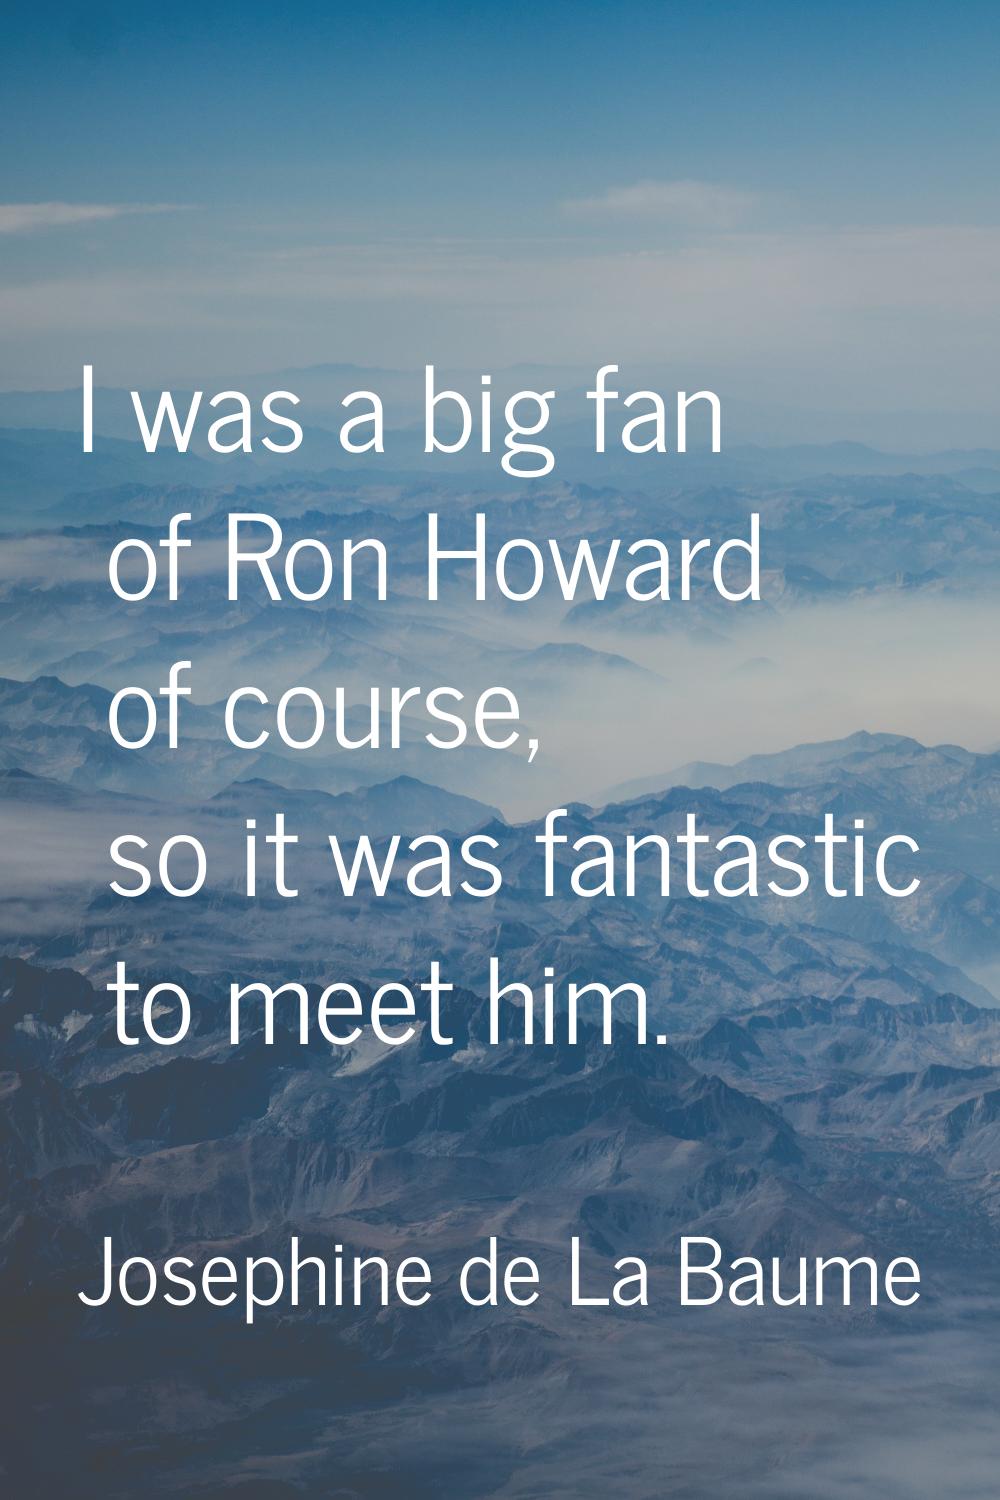 I was a big fan of Ron Howard of course, so it was fantastic to meet him.